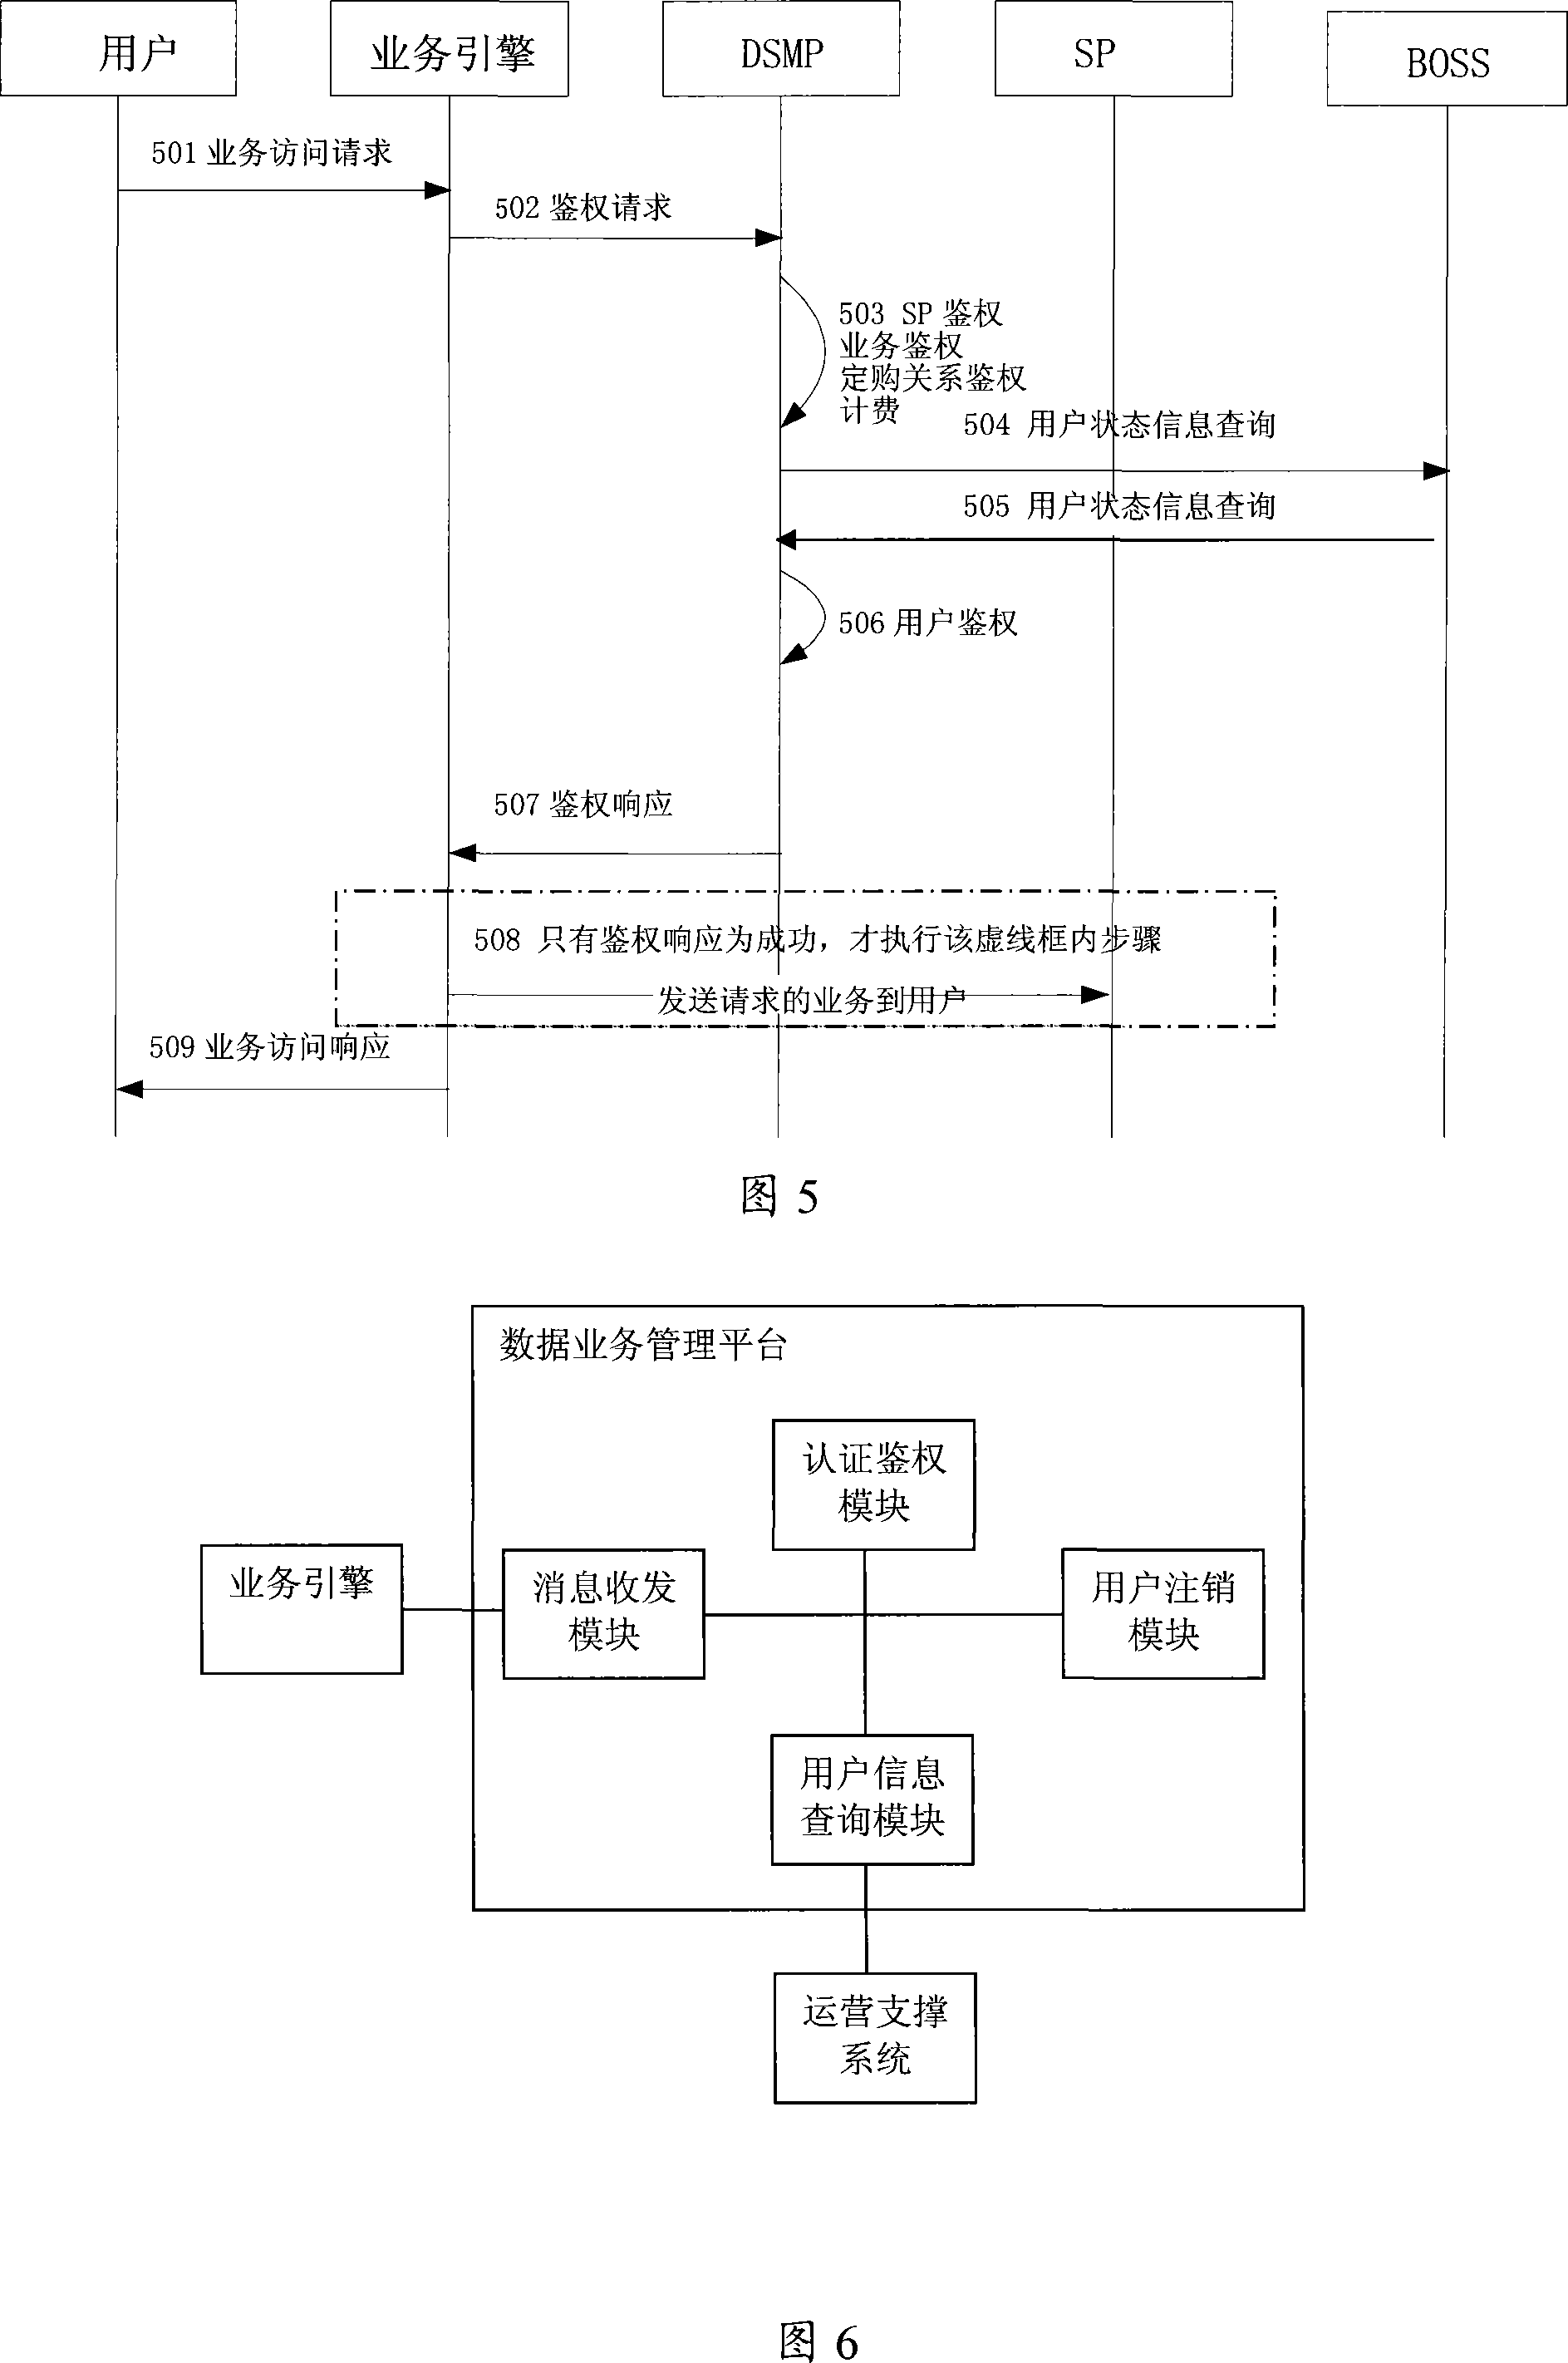 Method and system for providing mobile data business